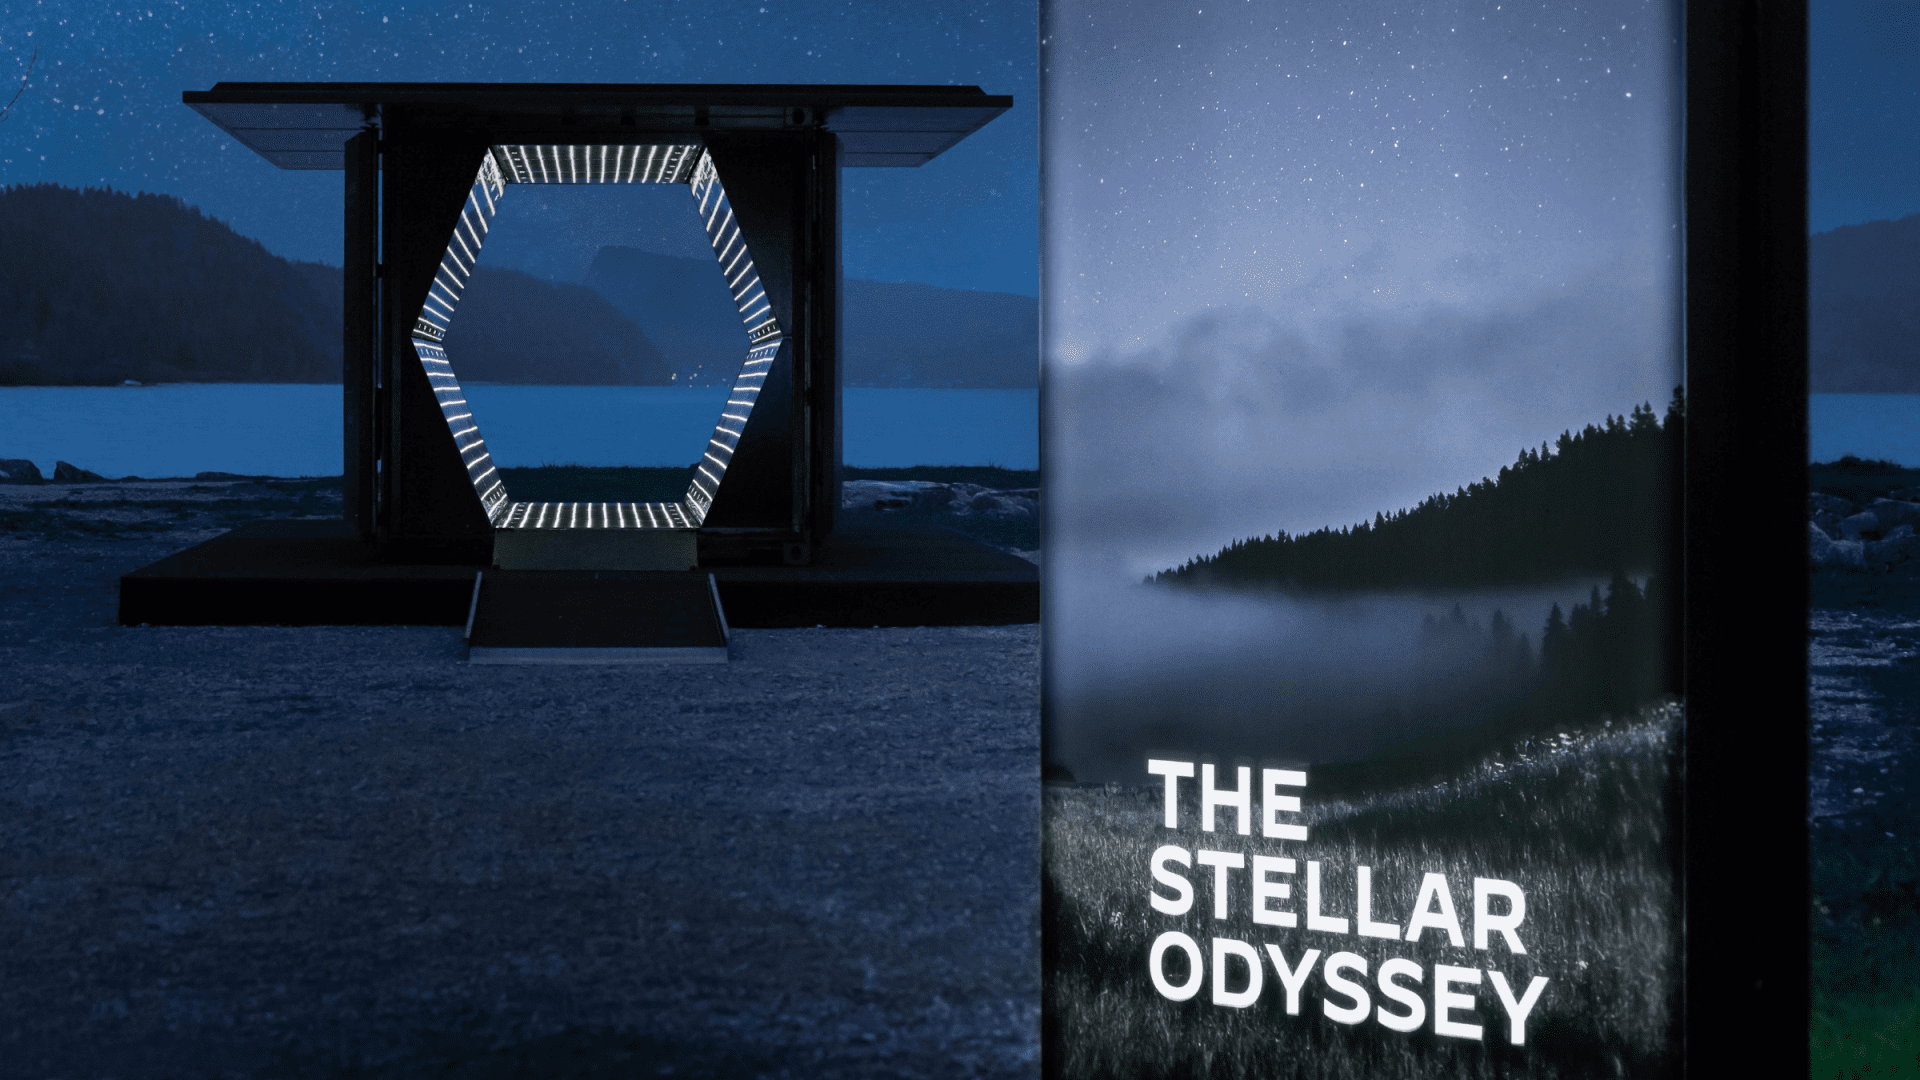 Jaeger-LeCoultre - The Stellar Odyssey - Guillaume Marmin - Passengers Through Time